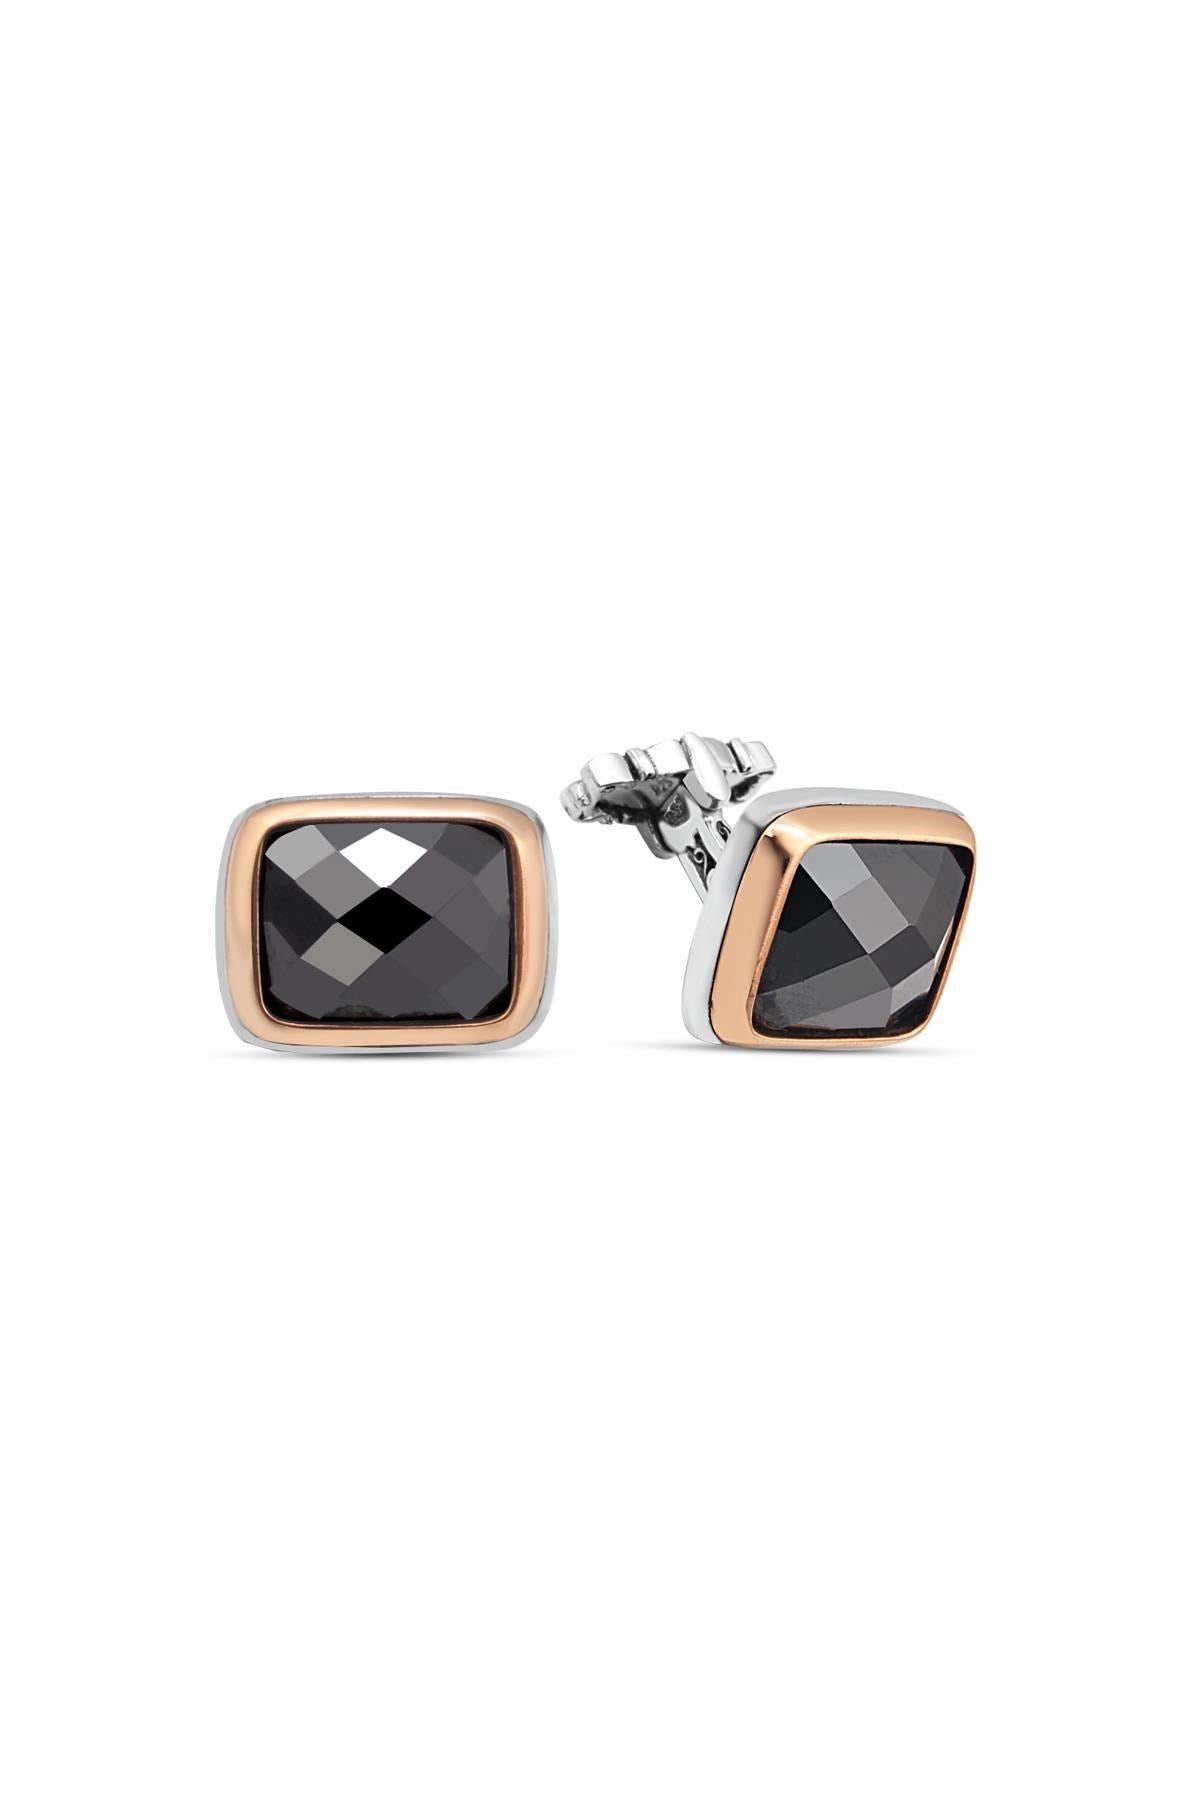 OrlaSilver Black Onyx Sterling Silver Rectangle Cufflinks - Unique Gift for Groomsmen & Celebratory Events